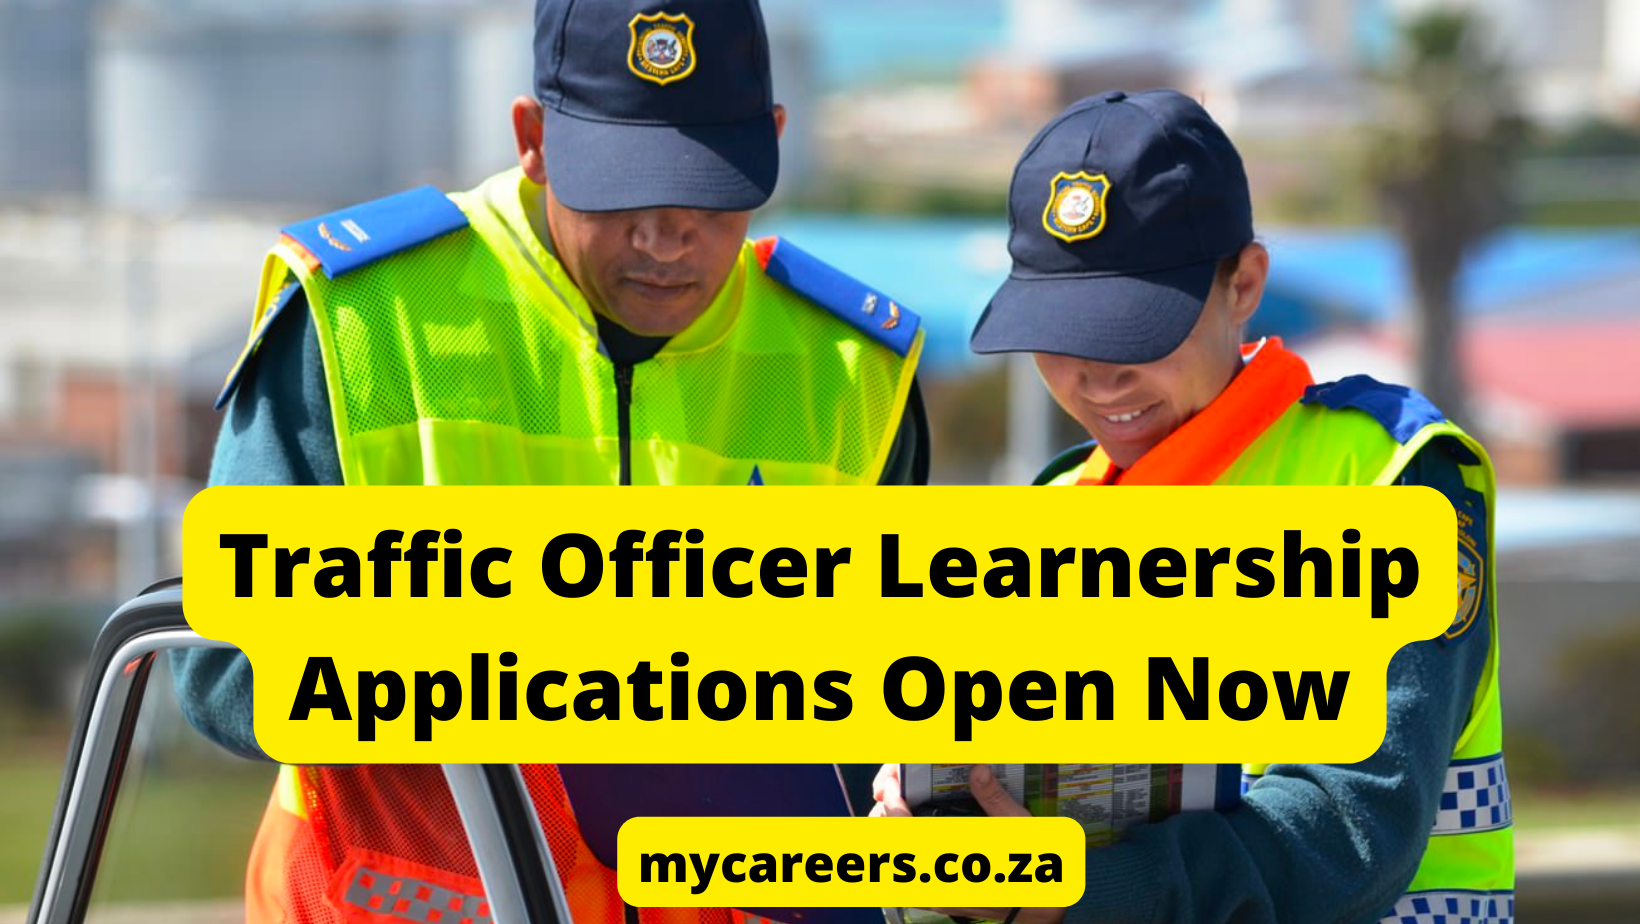 Traffic Officer Learnership Applications Open Now Mycareers.co.za